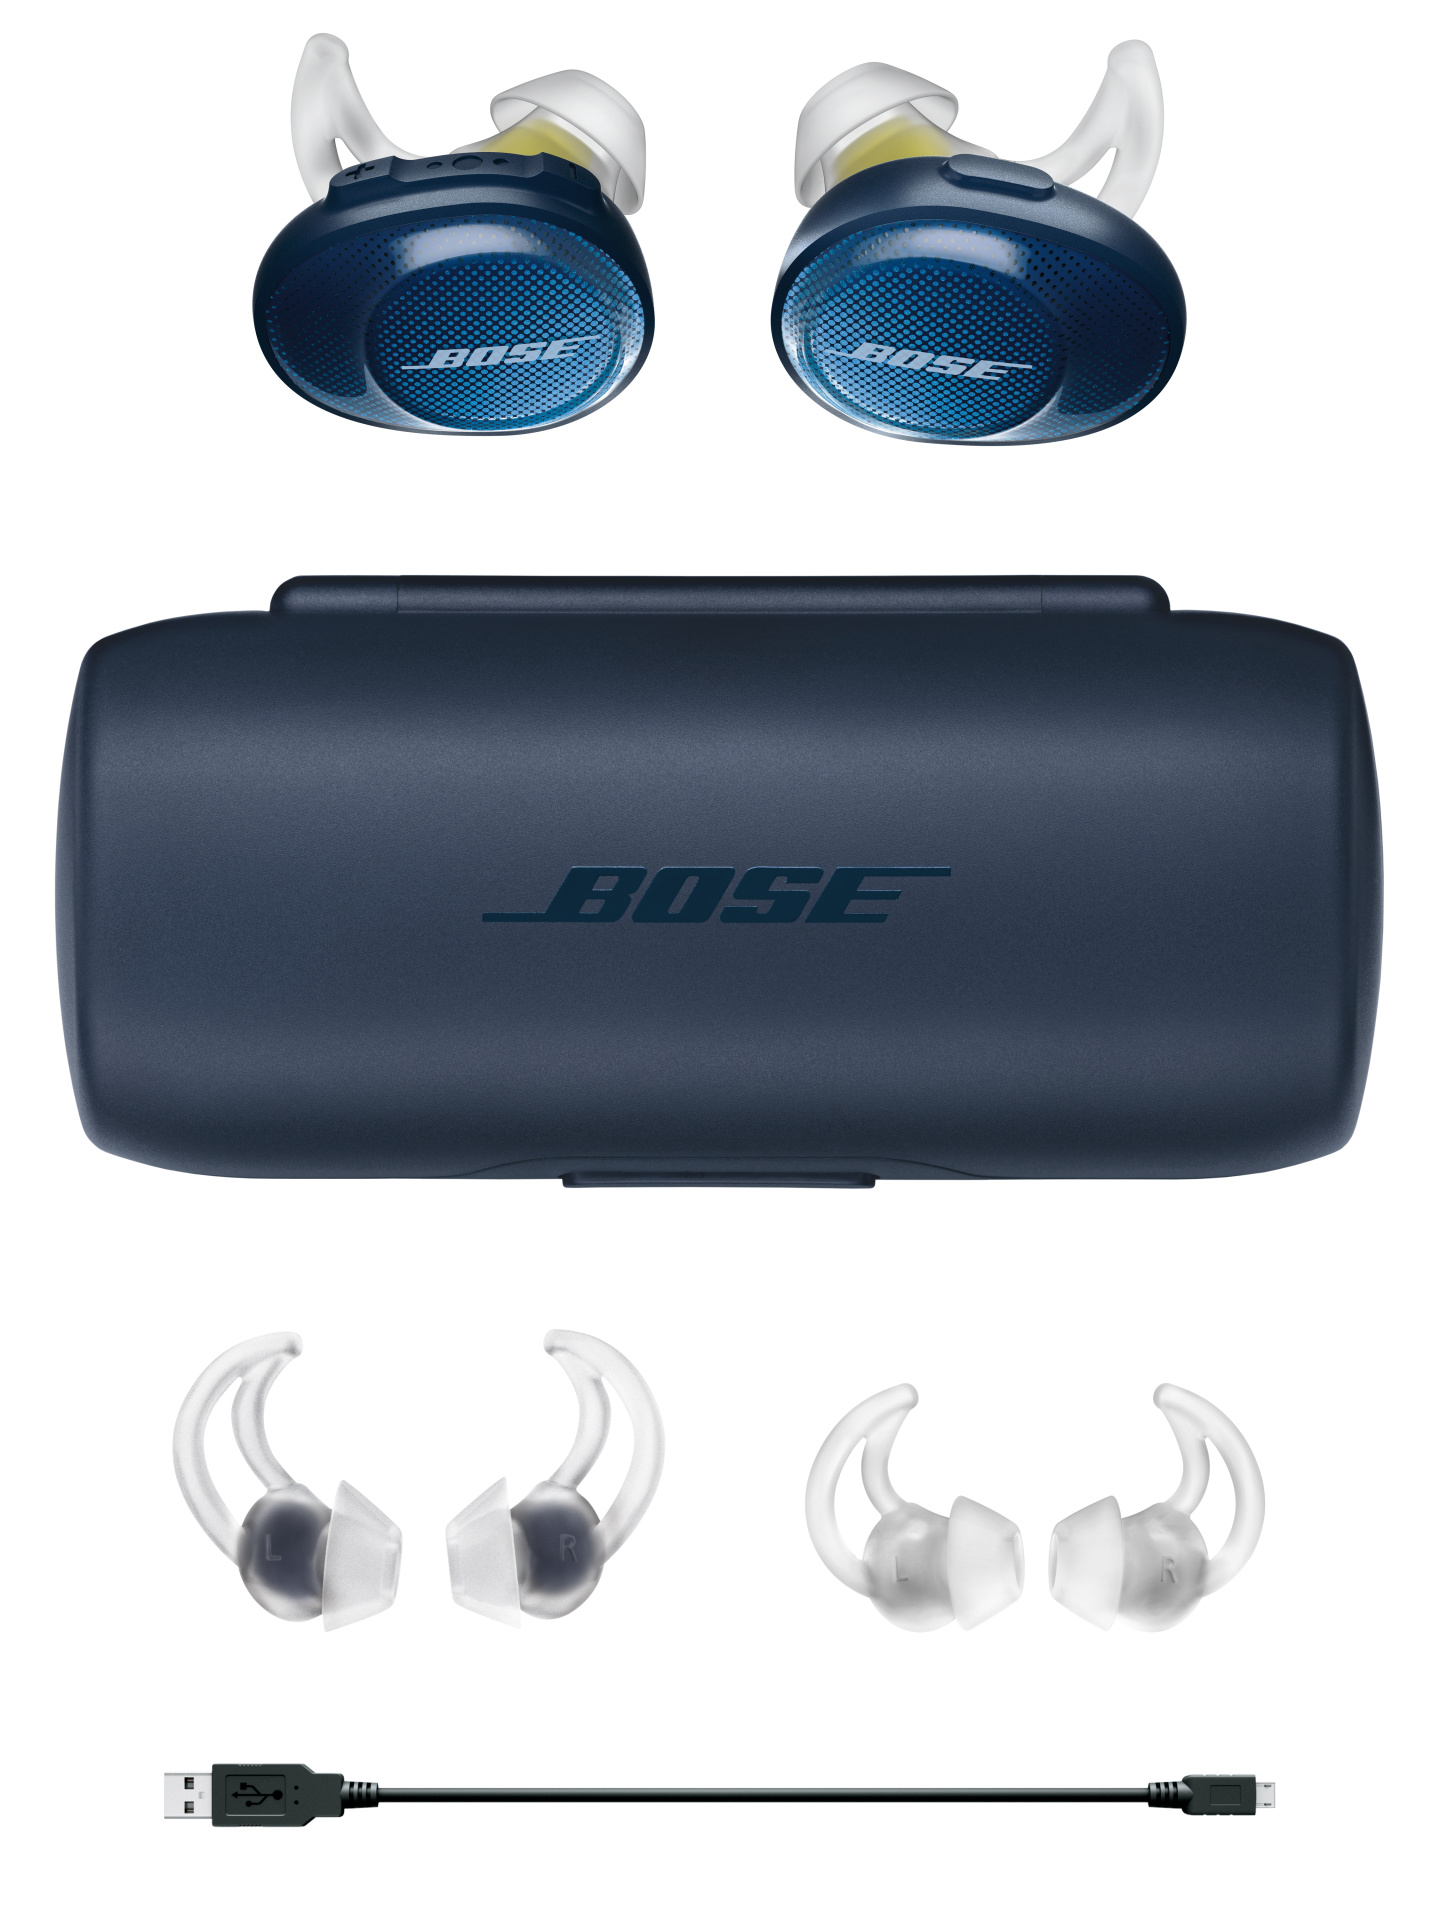 Bose SoundSport Bluetooth True Wireless Earbuds with Charging Case, Blue, SNDSPFREENVY - image 5 of 6